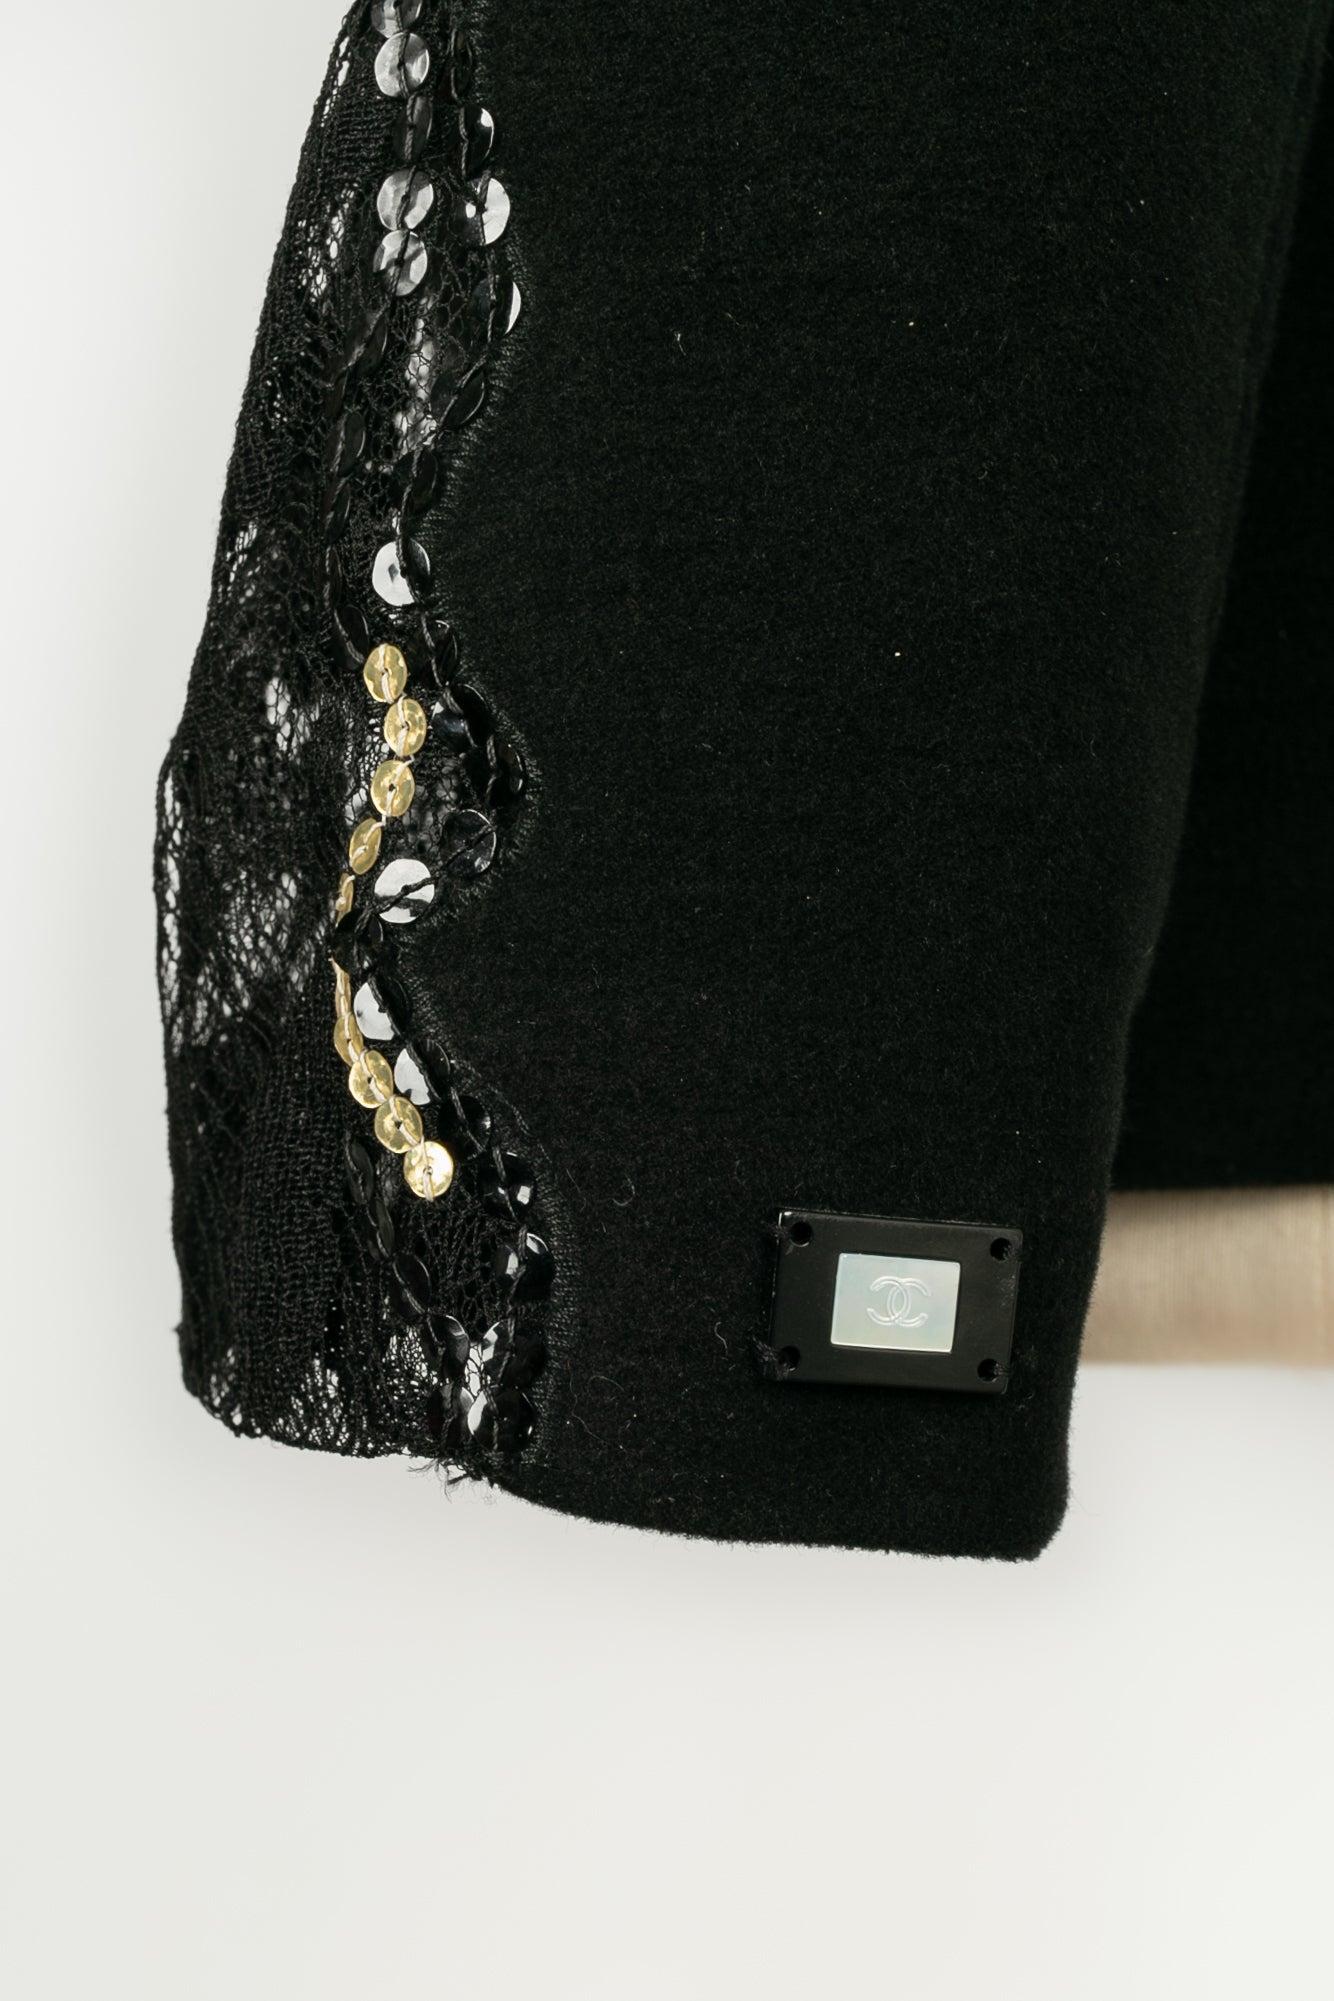 Chanel Embroidered Jacket in Suede and Lace with Sequins For Sale 1